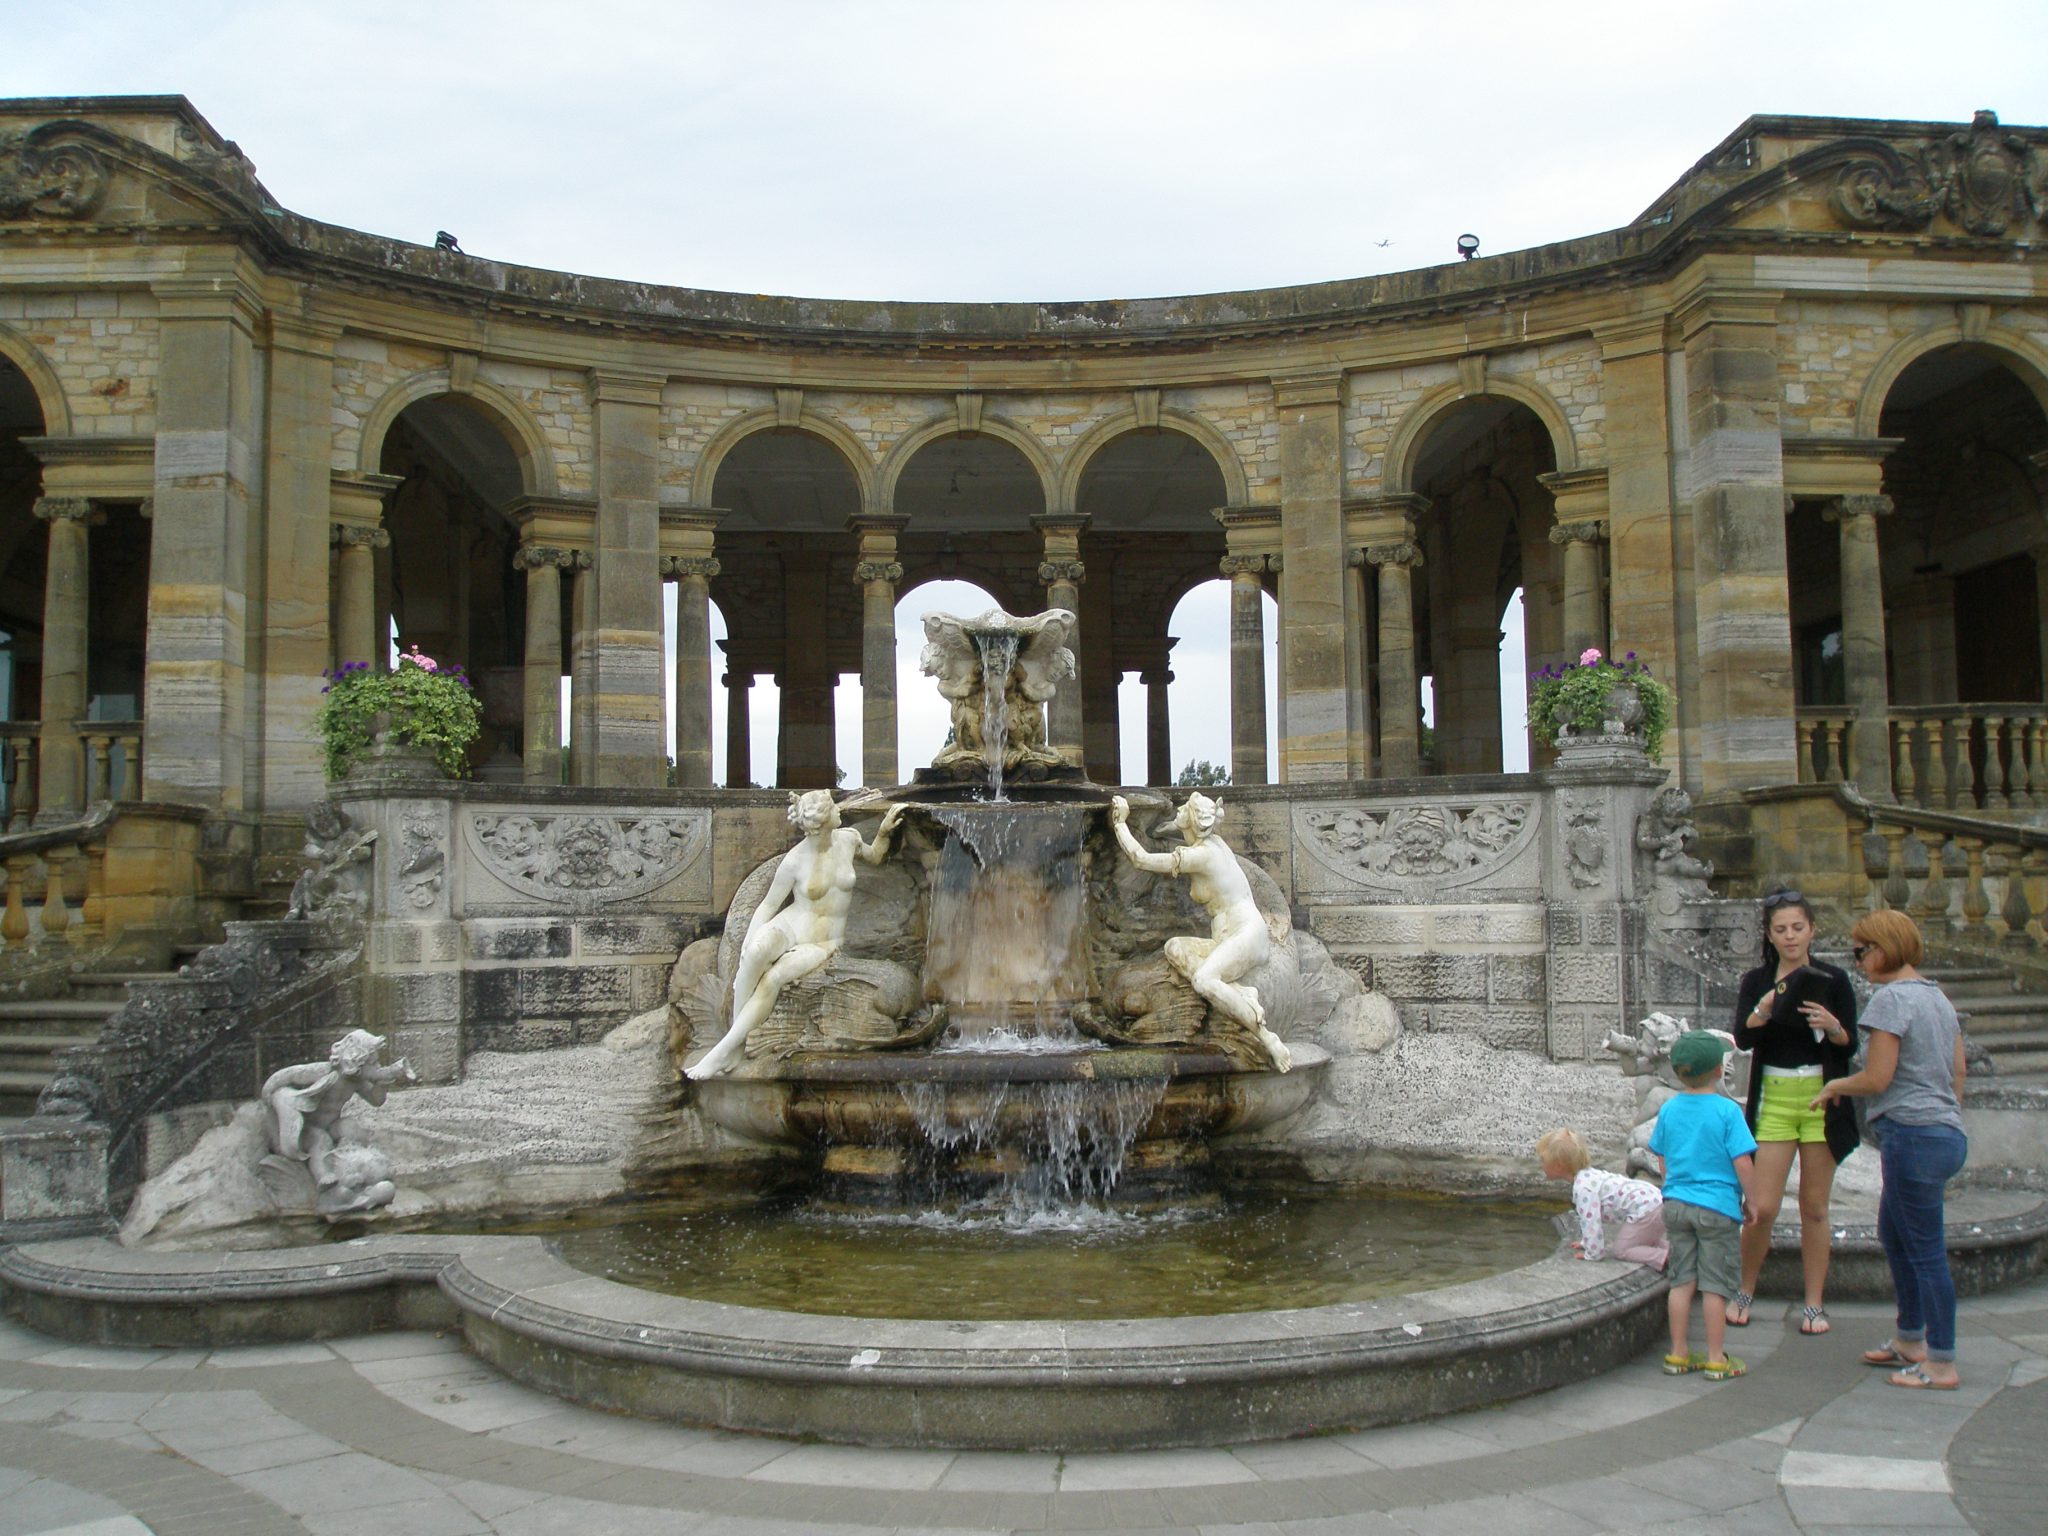 The Nymphs' Fountain, by the Loggia, at the east end of the Lake.